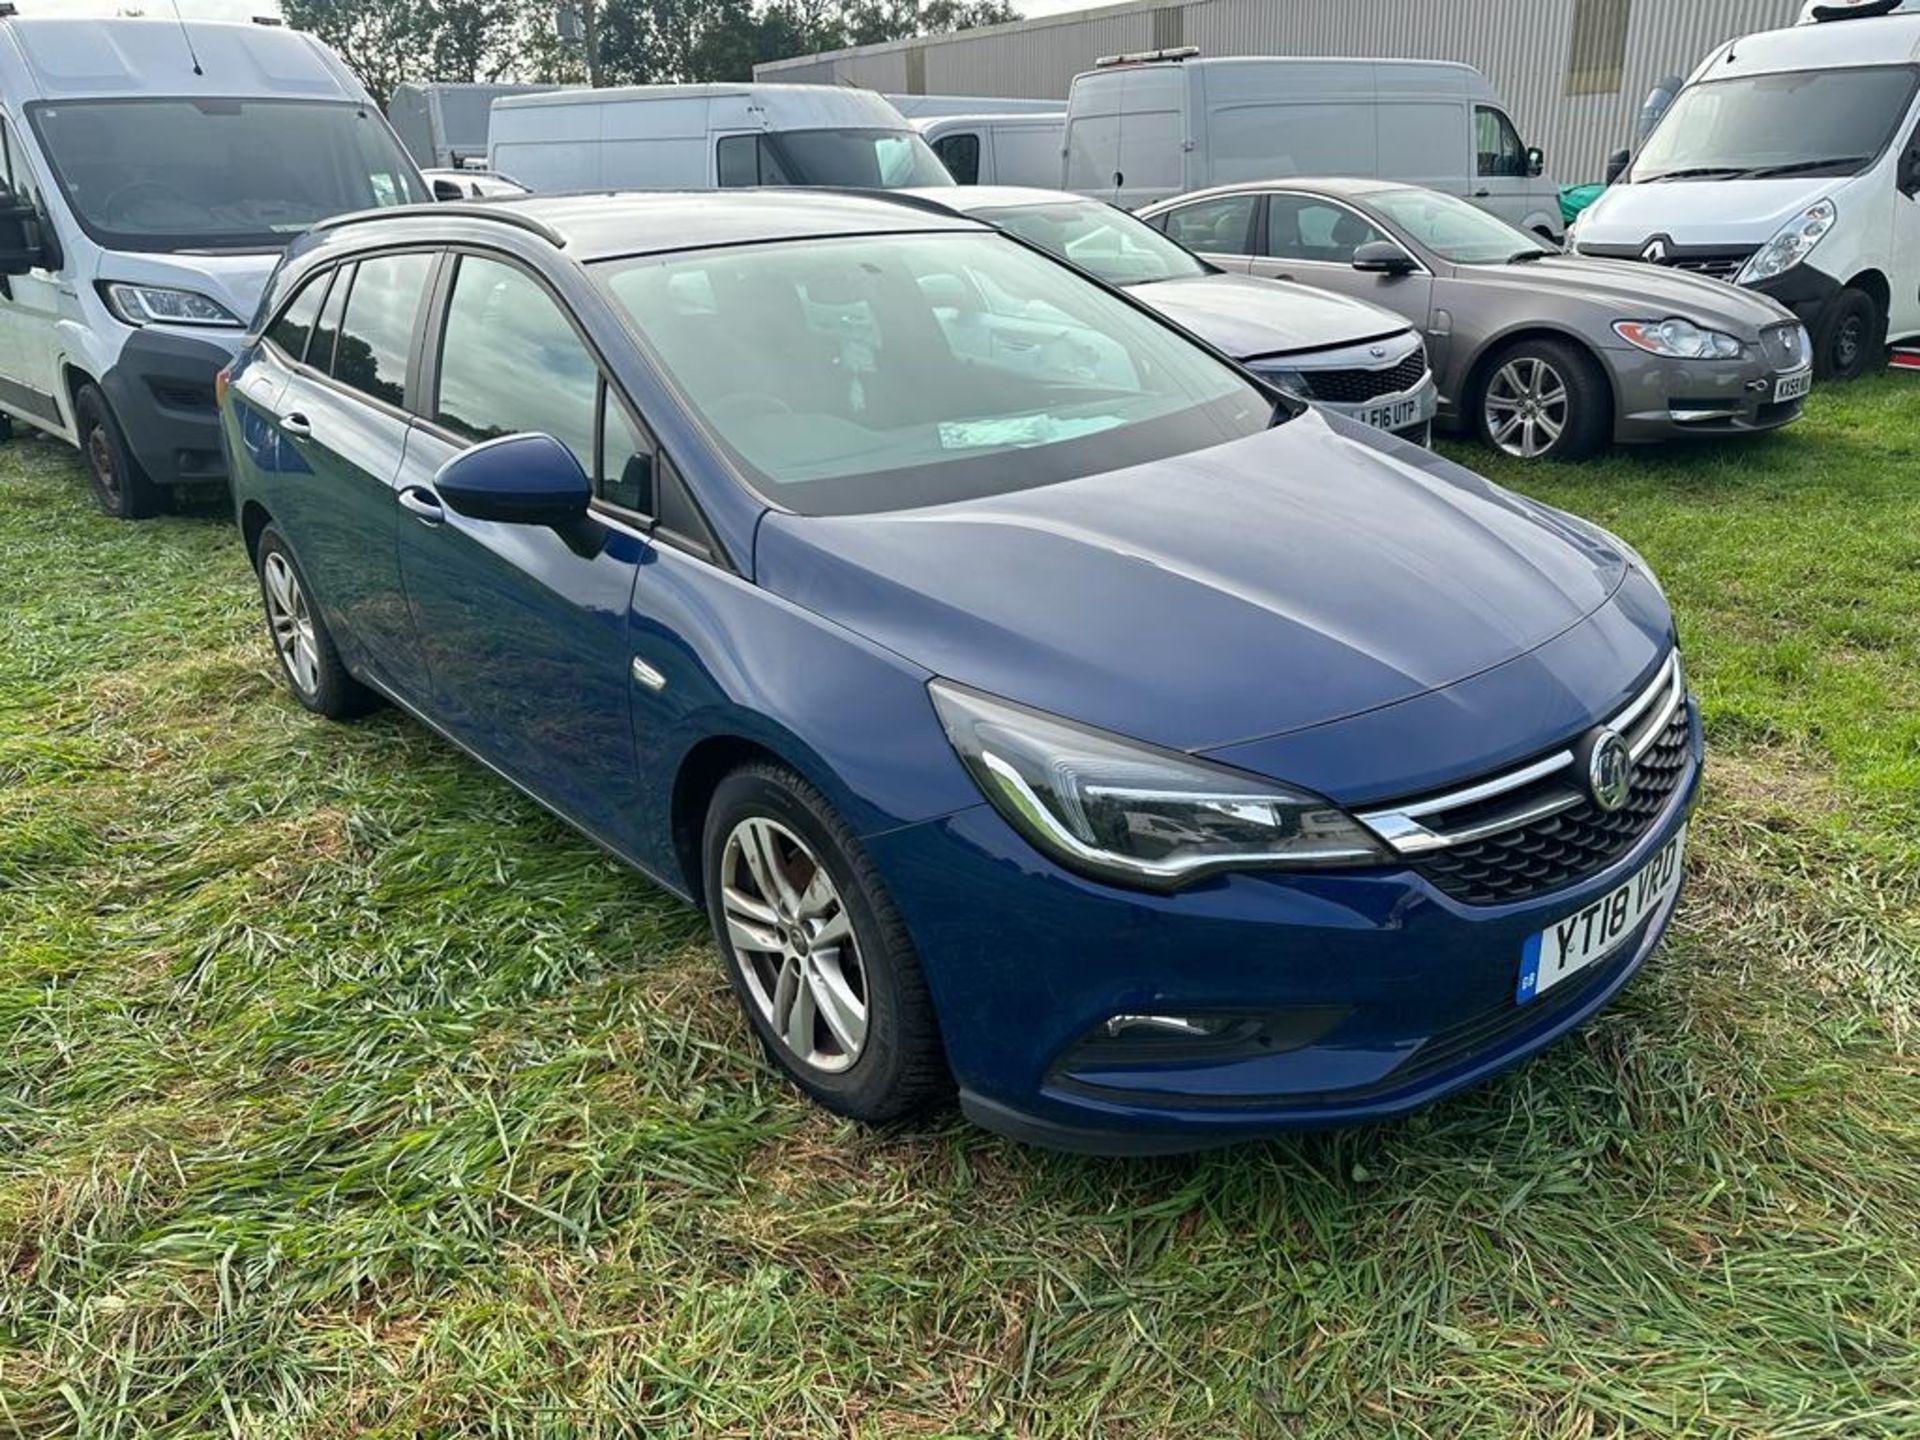 2018 18 VAUXHALL ASTRA ESTATE 1.6 CDTI ESTATE - 86K MILES WITH HISTORY - NON RUNNER